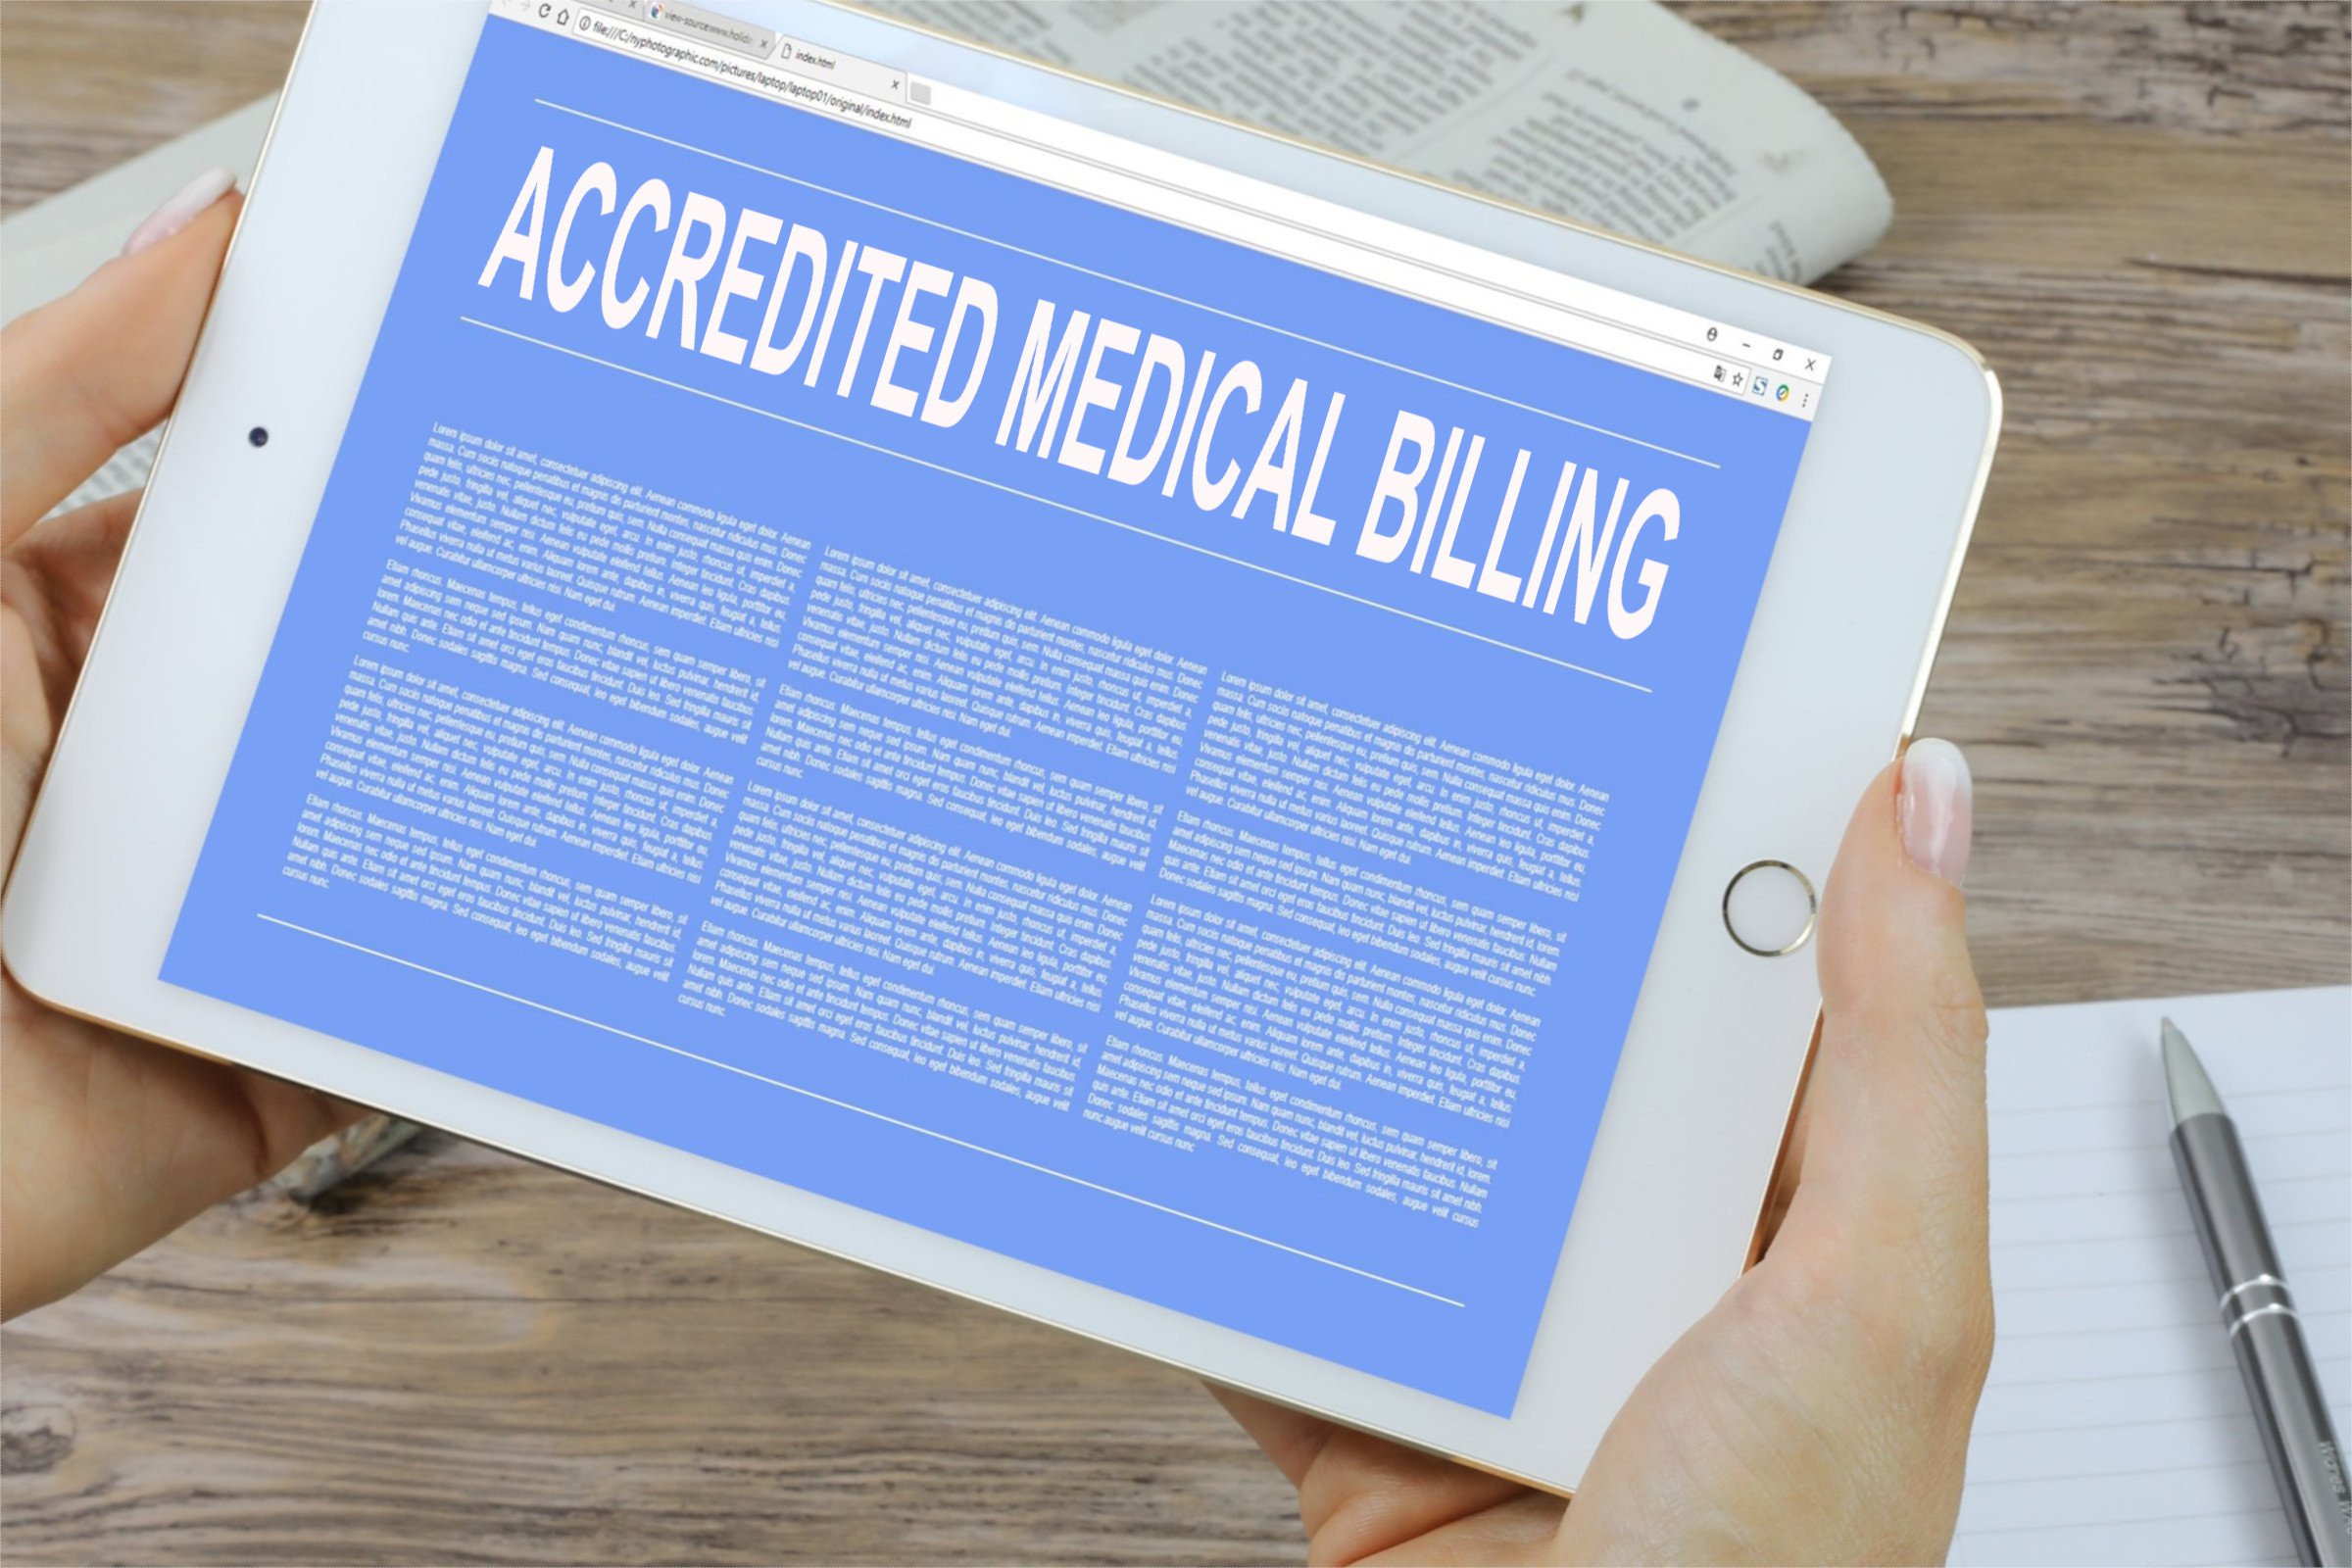 Free of Charge Creative Commons accredited medical billing Image Tablet 1